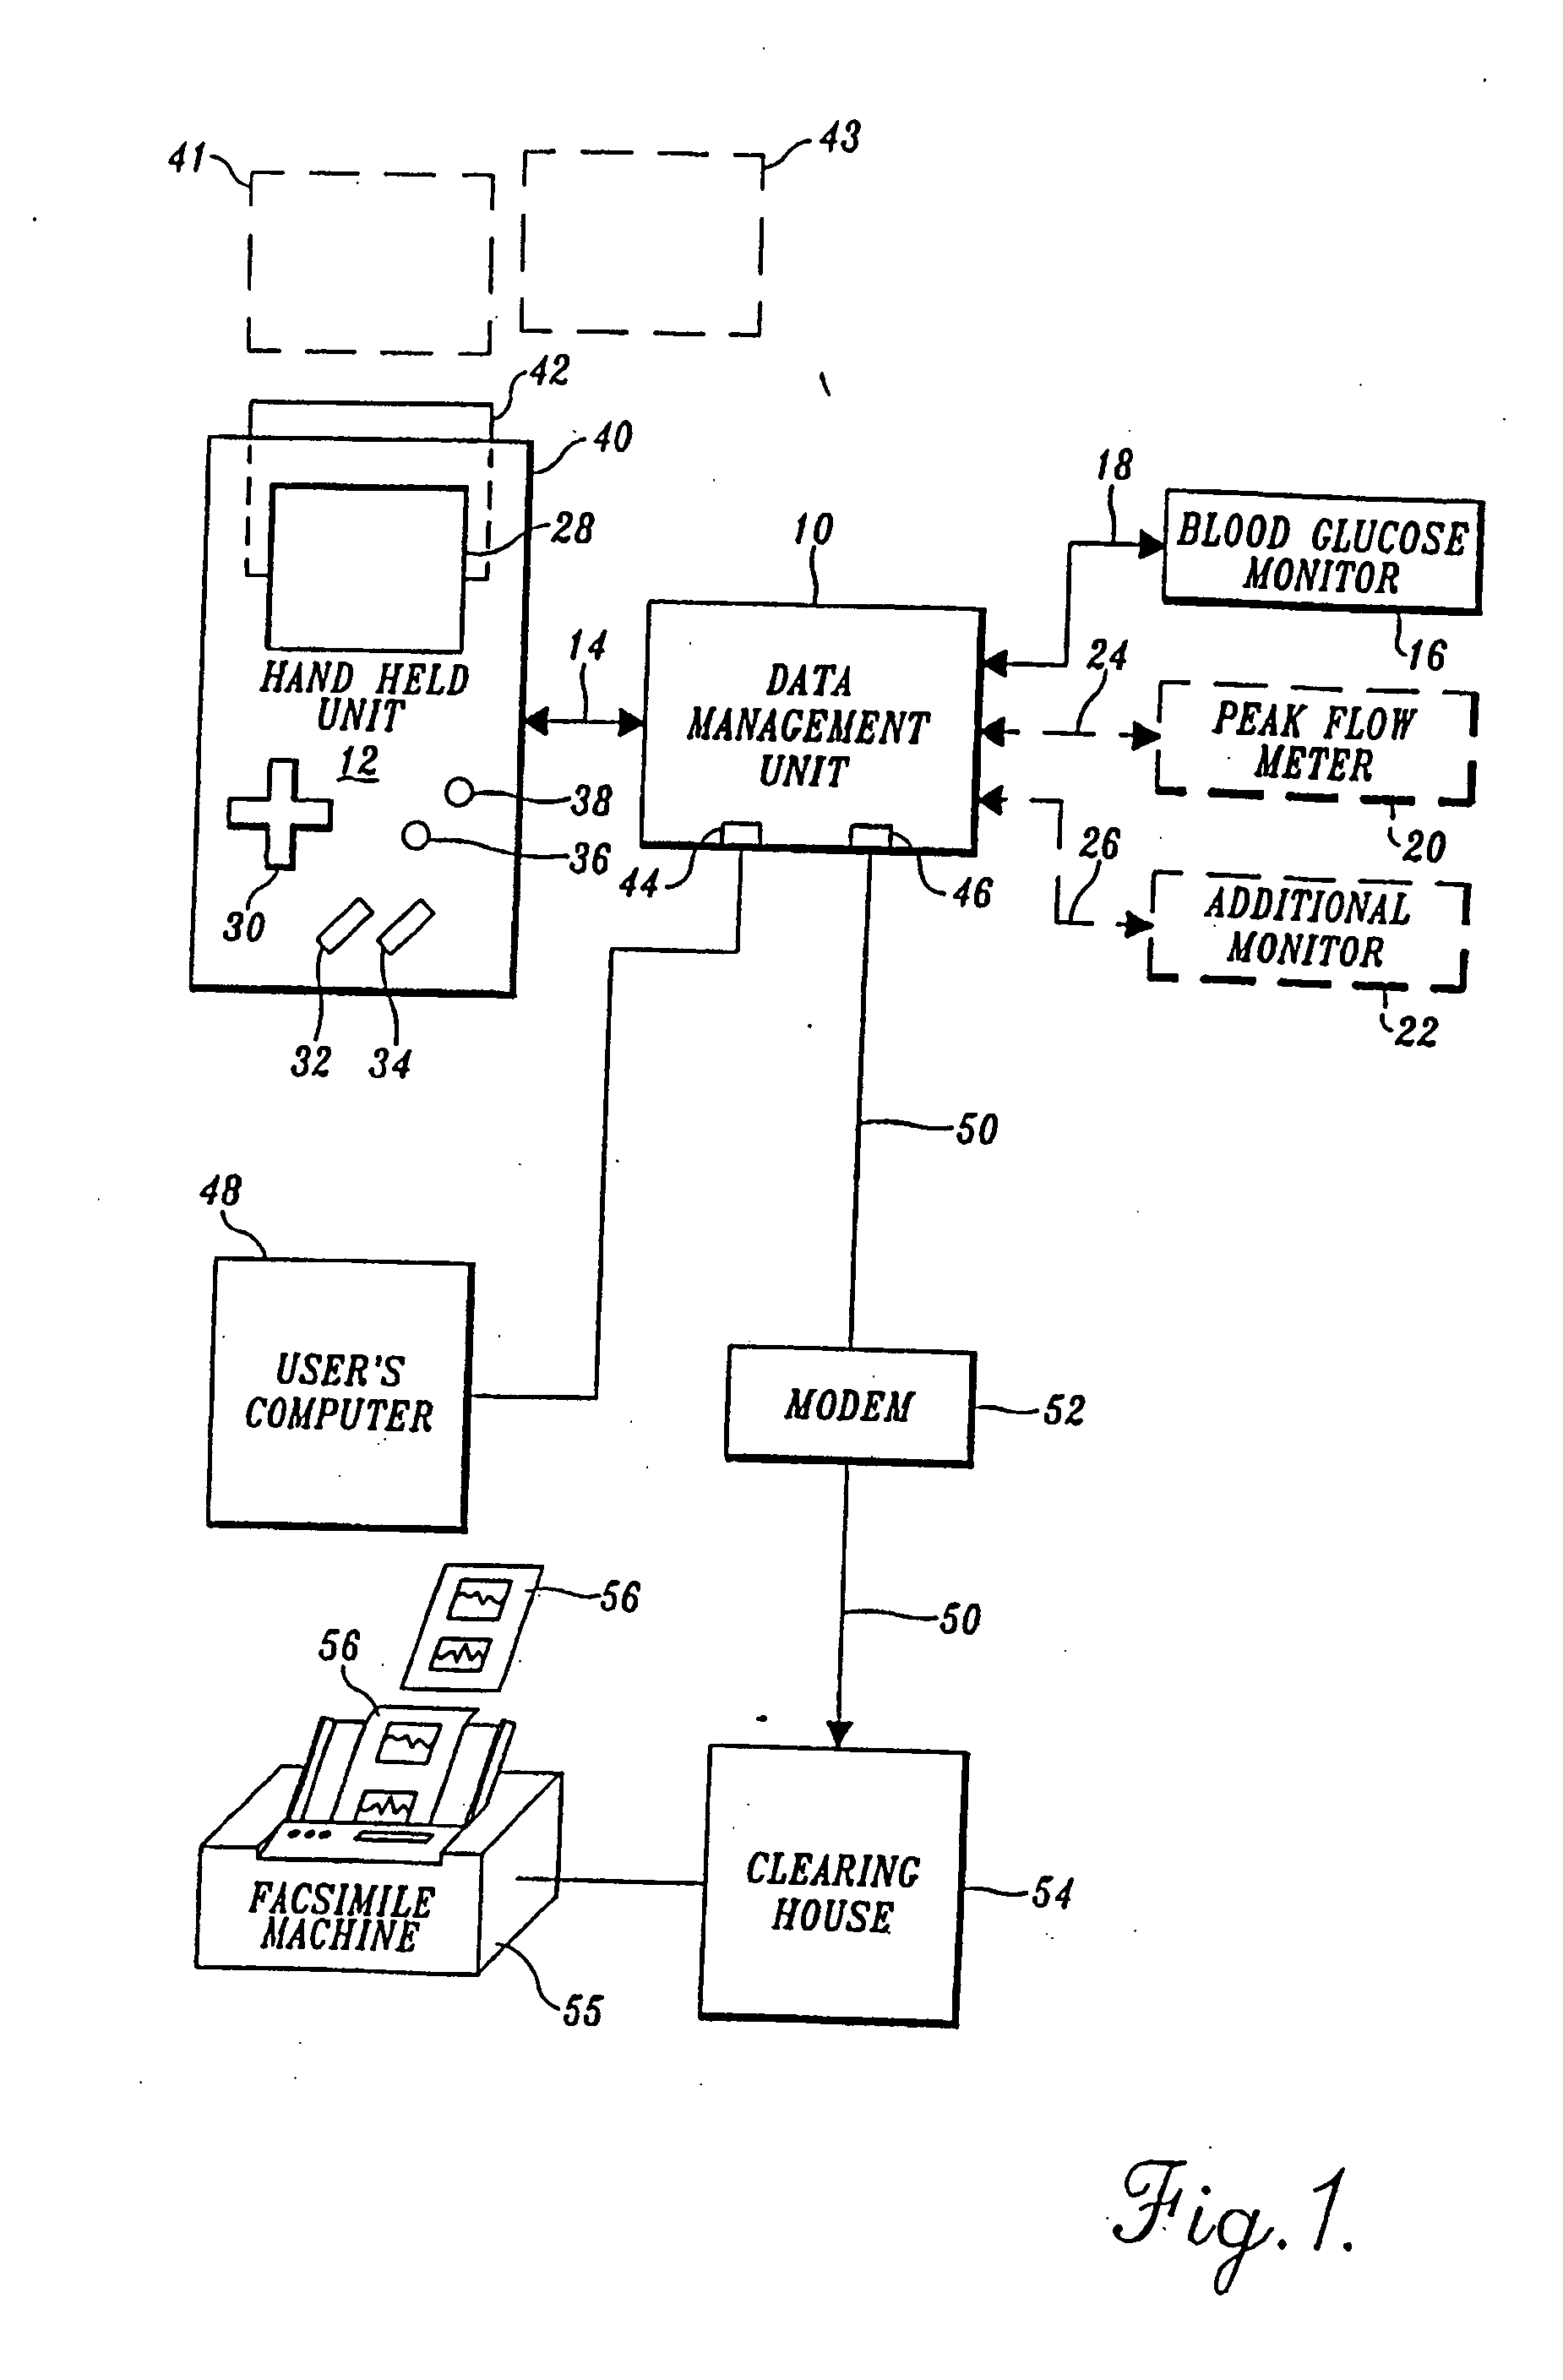 System and methods for monitoring a patient's heart condition